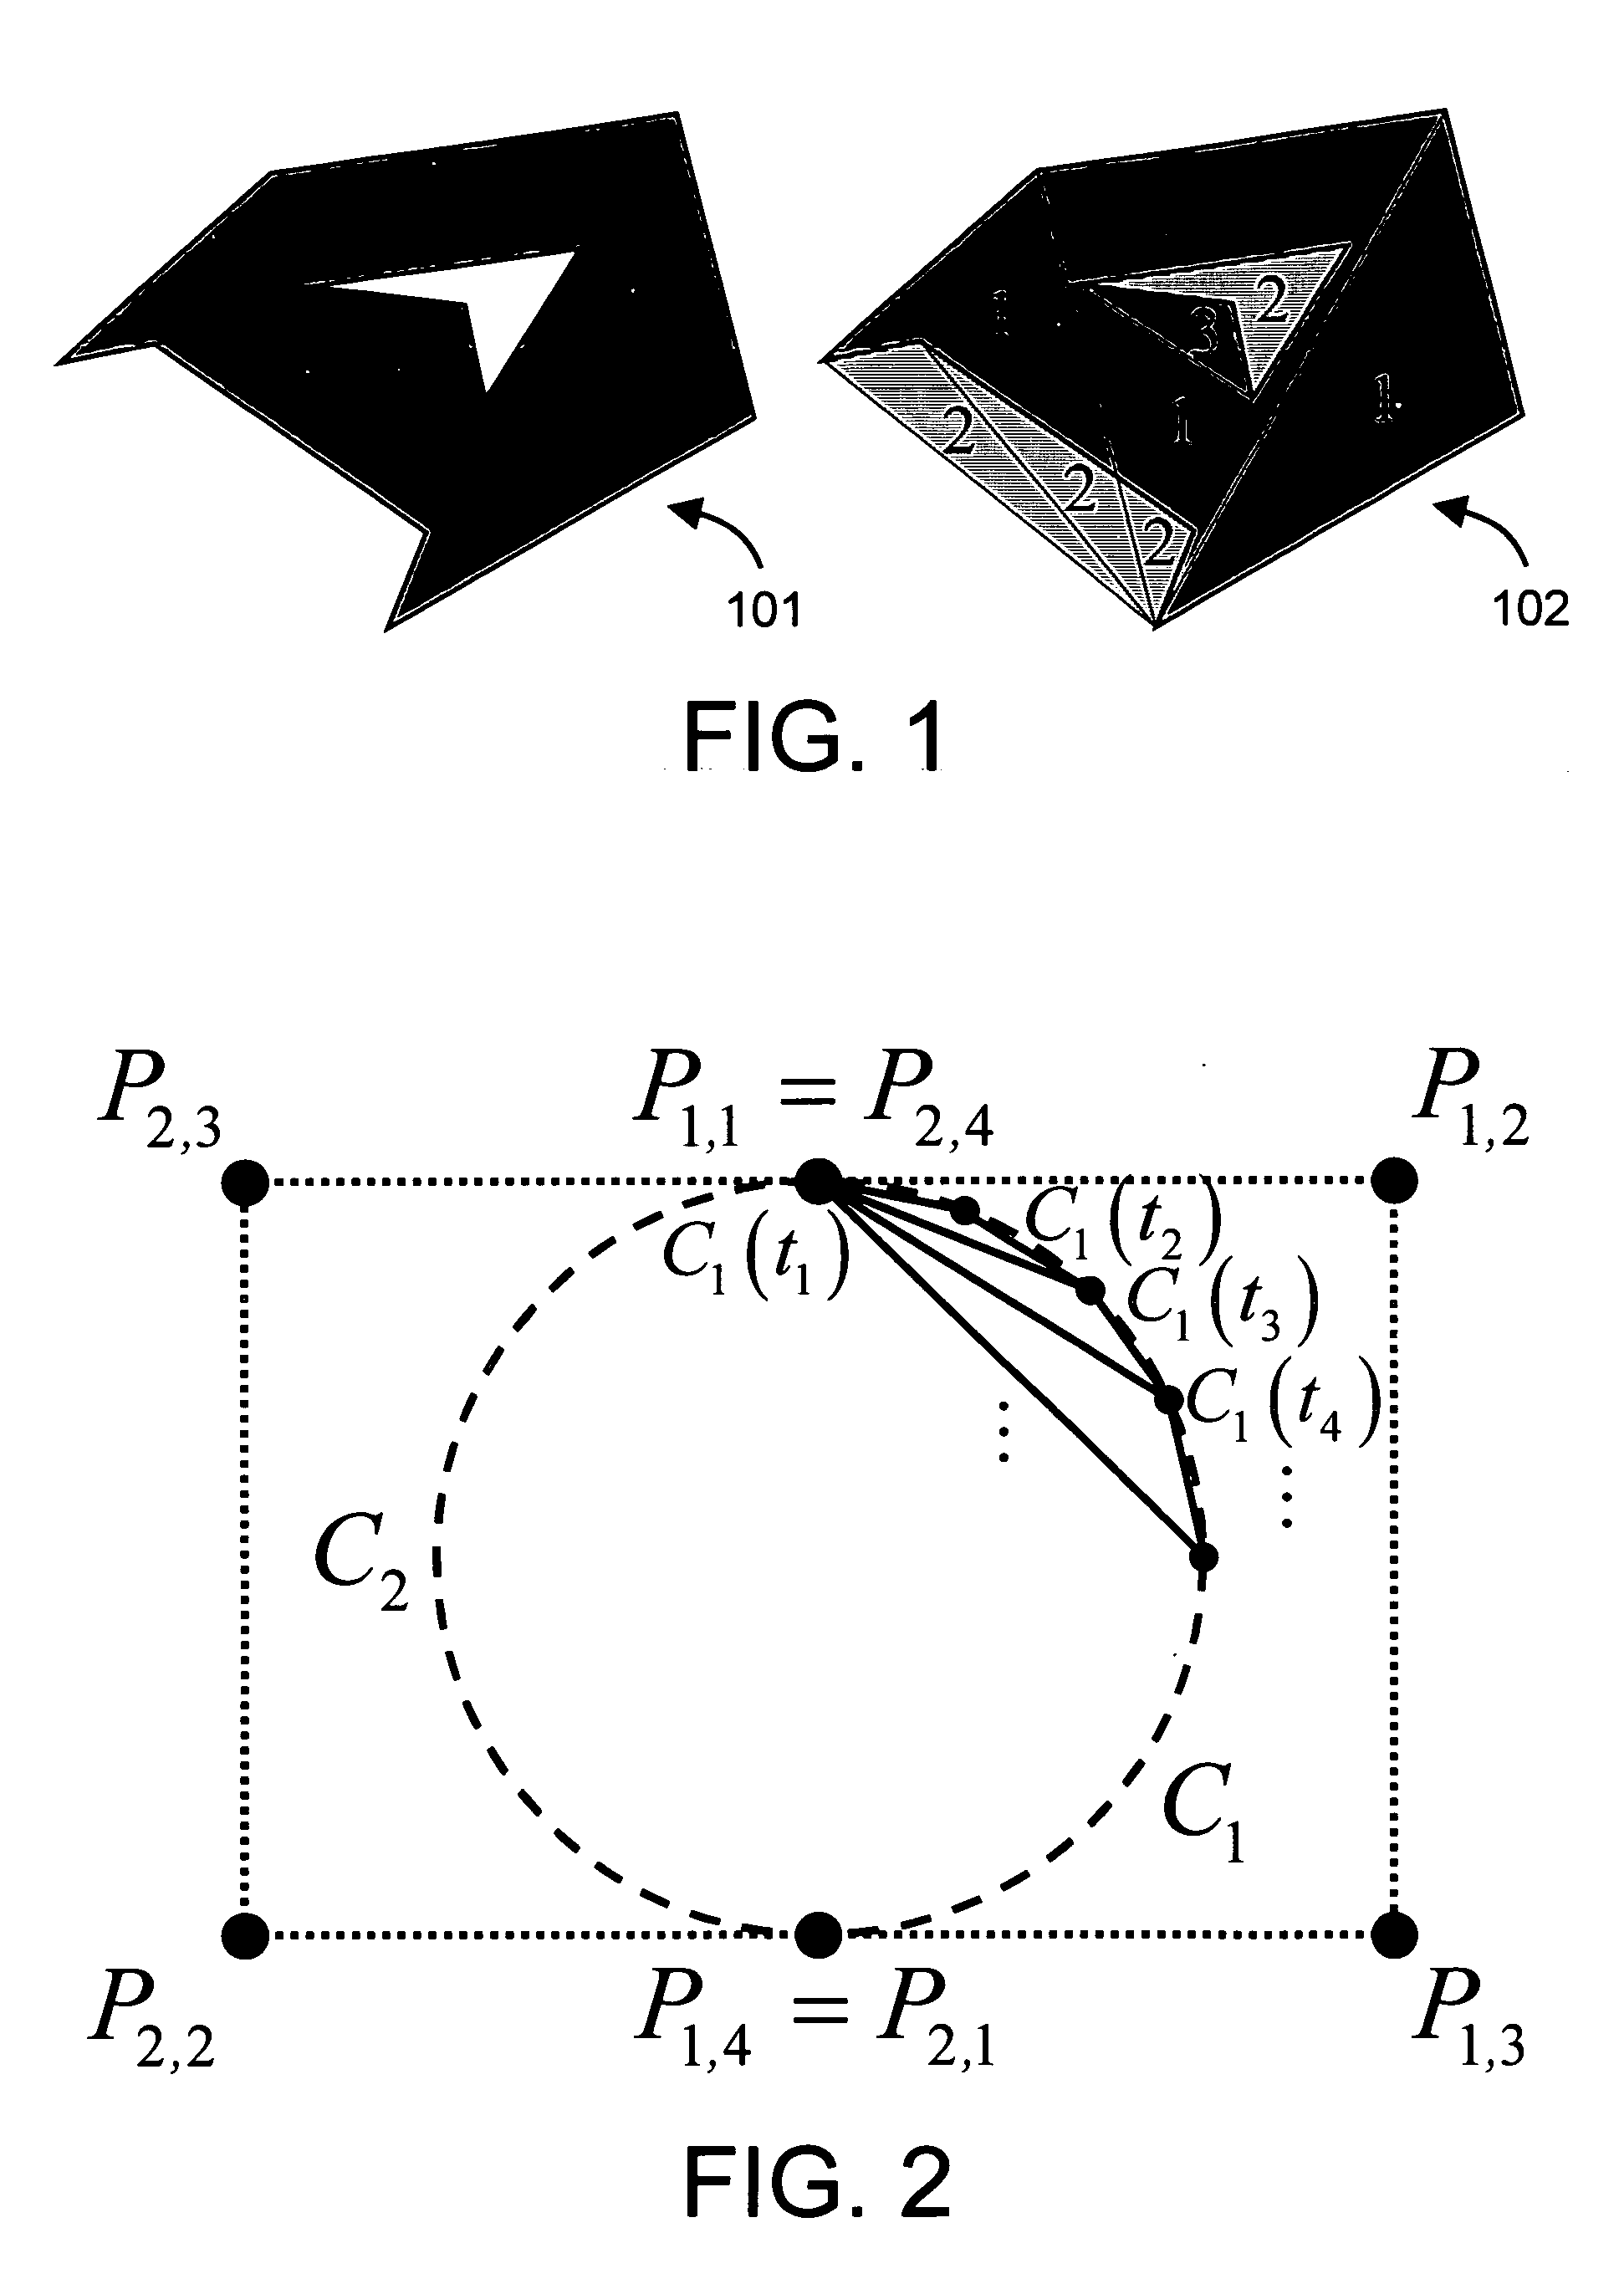 Method and applications for rasterization of non-simple polygons and curved boundary representations